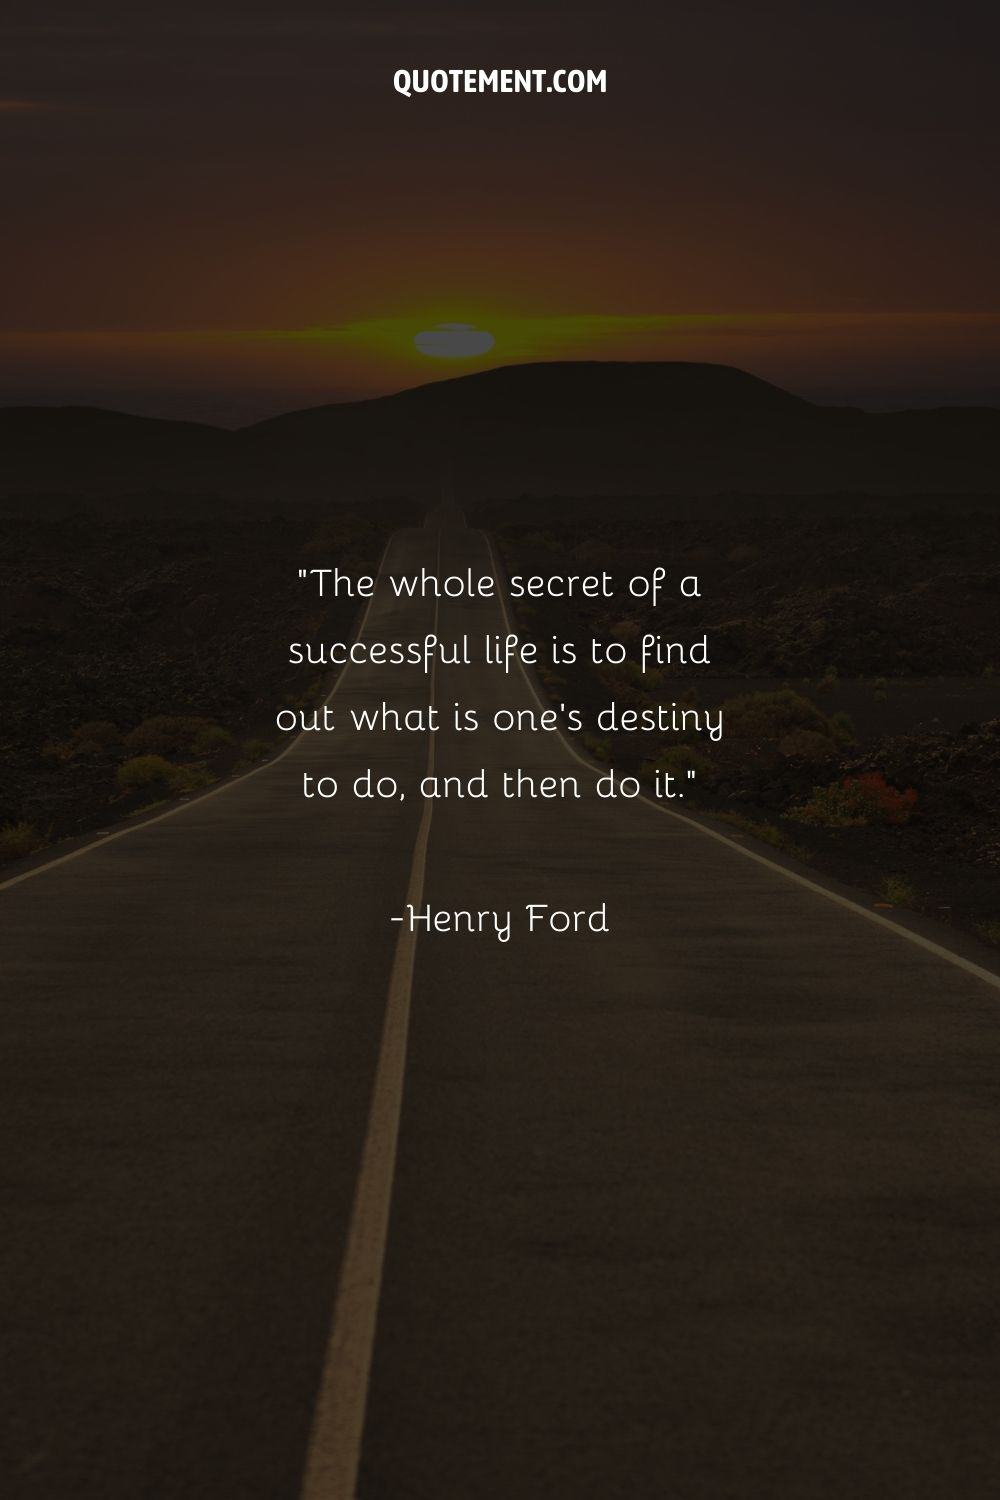 amazing life quote represented by an image of a sunset
